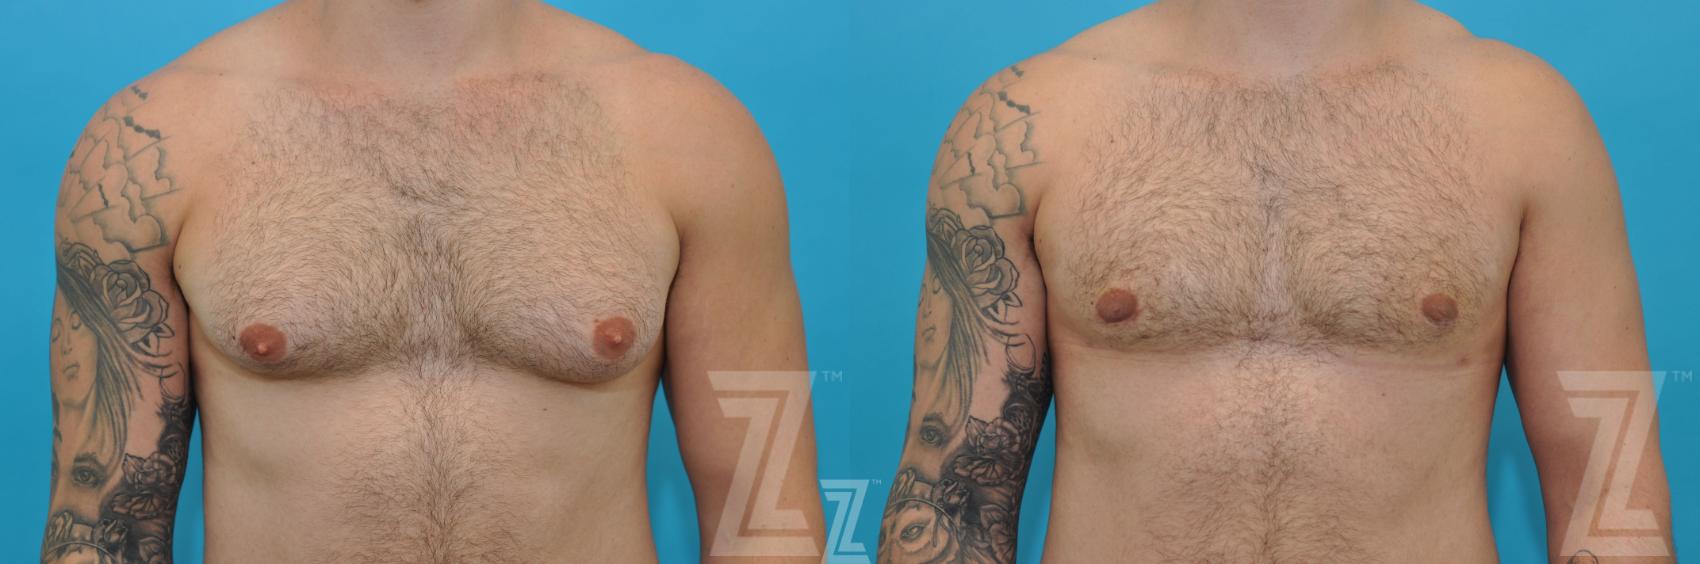 Male Breast Reduction Before & After Photo | Austin, TX | The Piazza Center for Plastic Surgery & Advanced Skin Care